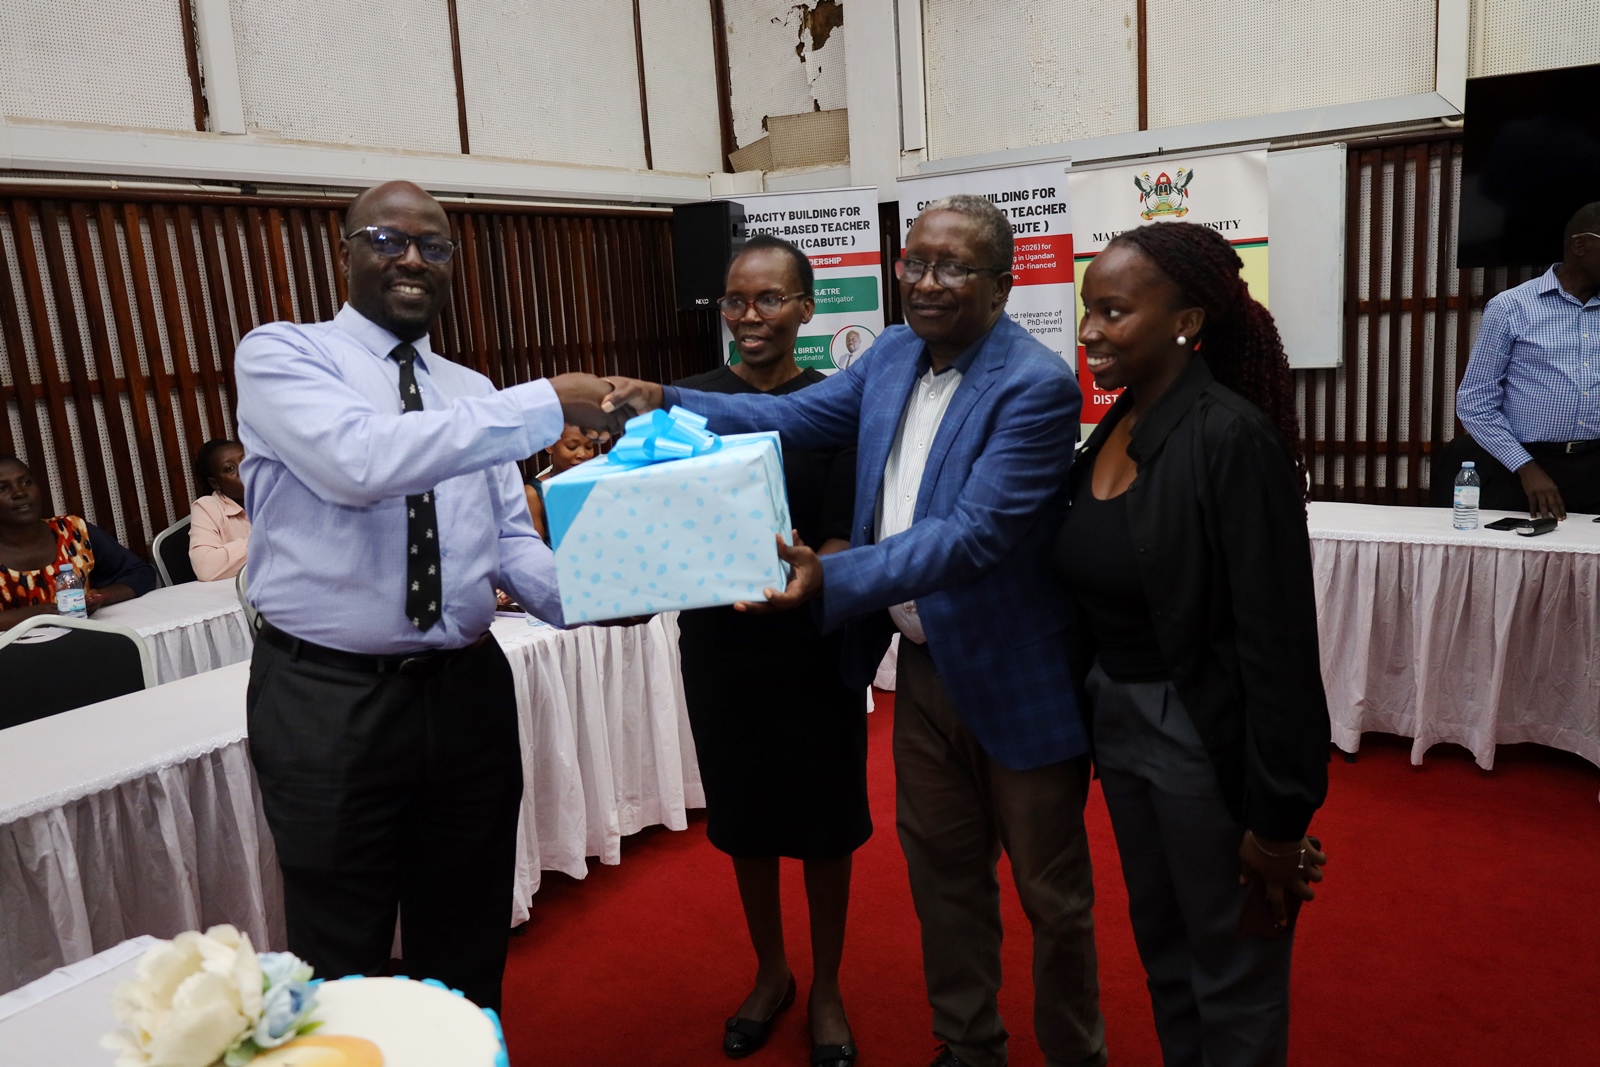 Dr. Samuel Siminyu (2nd Right) flanked by members of his family receives a gift from the Director IODeL, Prof. Paul Birevu Muyinda (Left) at the farewell event. Dr. Samuel Ndeda Siminyu farewell luncheon by the Institute of Open, Distance and e-Learning (IODeL) on 27th March 2024, AVU Conference Room, College of Education and External Studies (CEES), Makerere University, Kampala Uganda, East Africa.